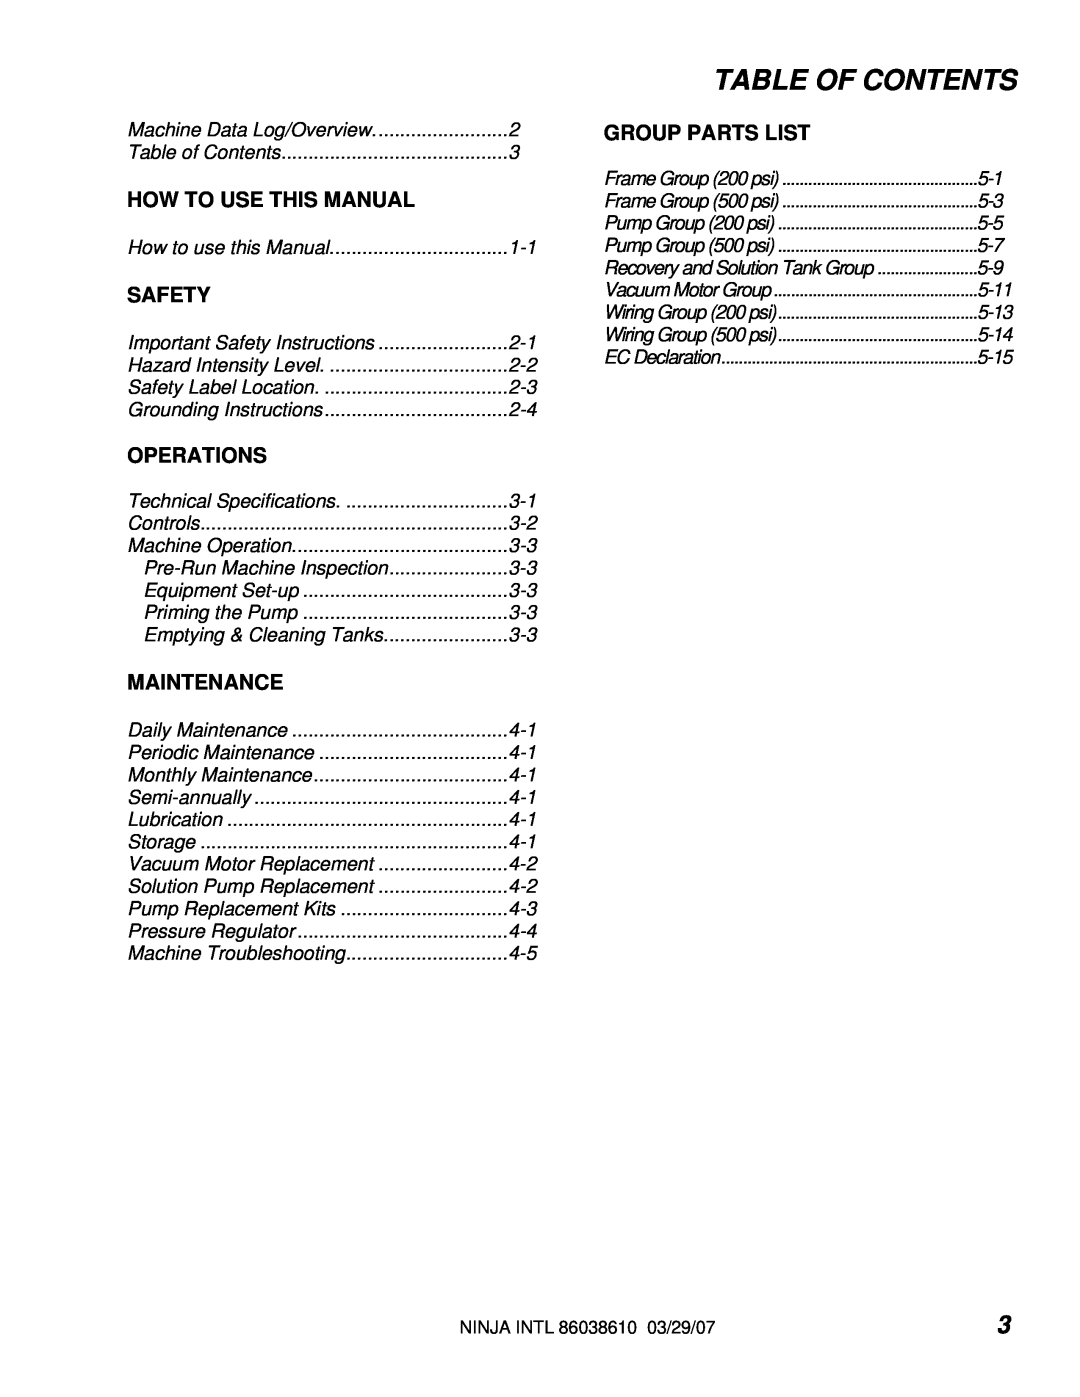 Windsor 621-225MO, 10070460 Table Of Contents, How To Use This Manual, Safety, Operations, Maintenance, Group Parts List 